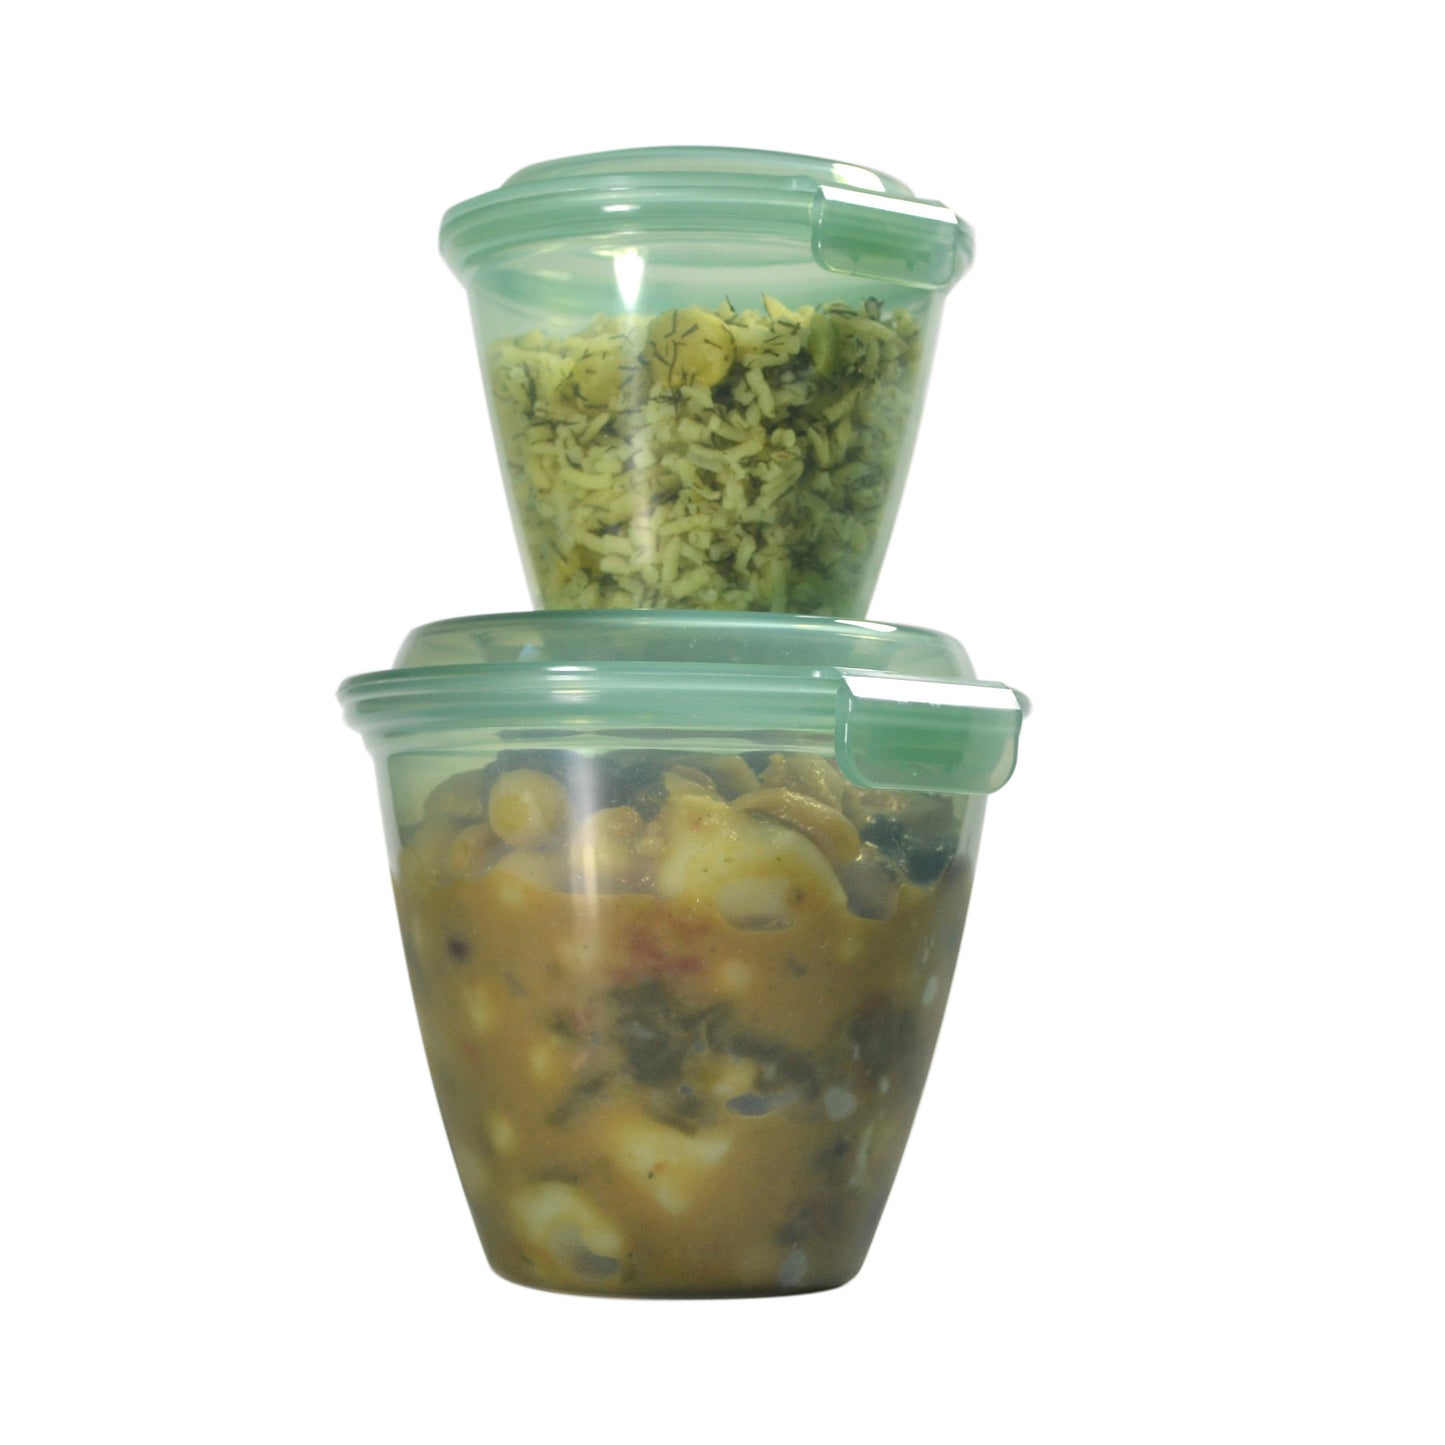 EC-16-JA - 3-Compartment Polypropylene, Jade, Flat Top Food Reusable  Container, 9 L x 9 W x 2 H, G.E.T. Eco-Takeout's - G.E.T